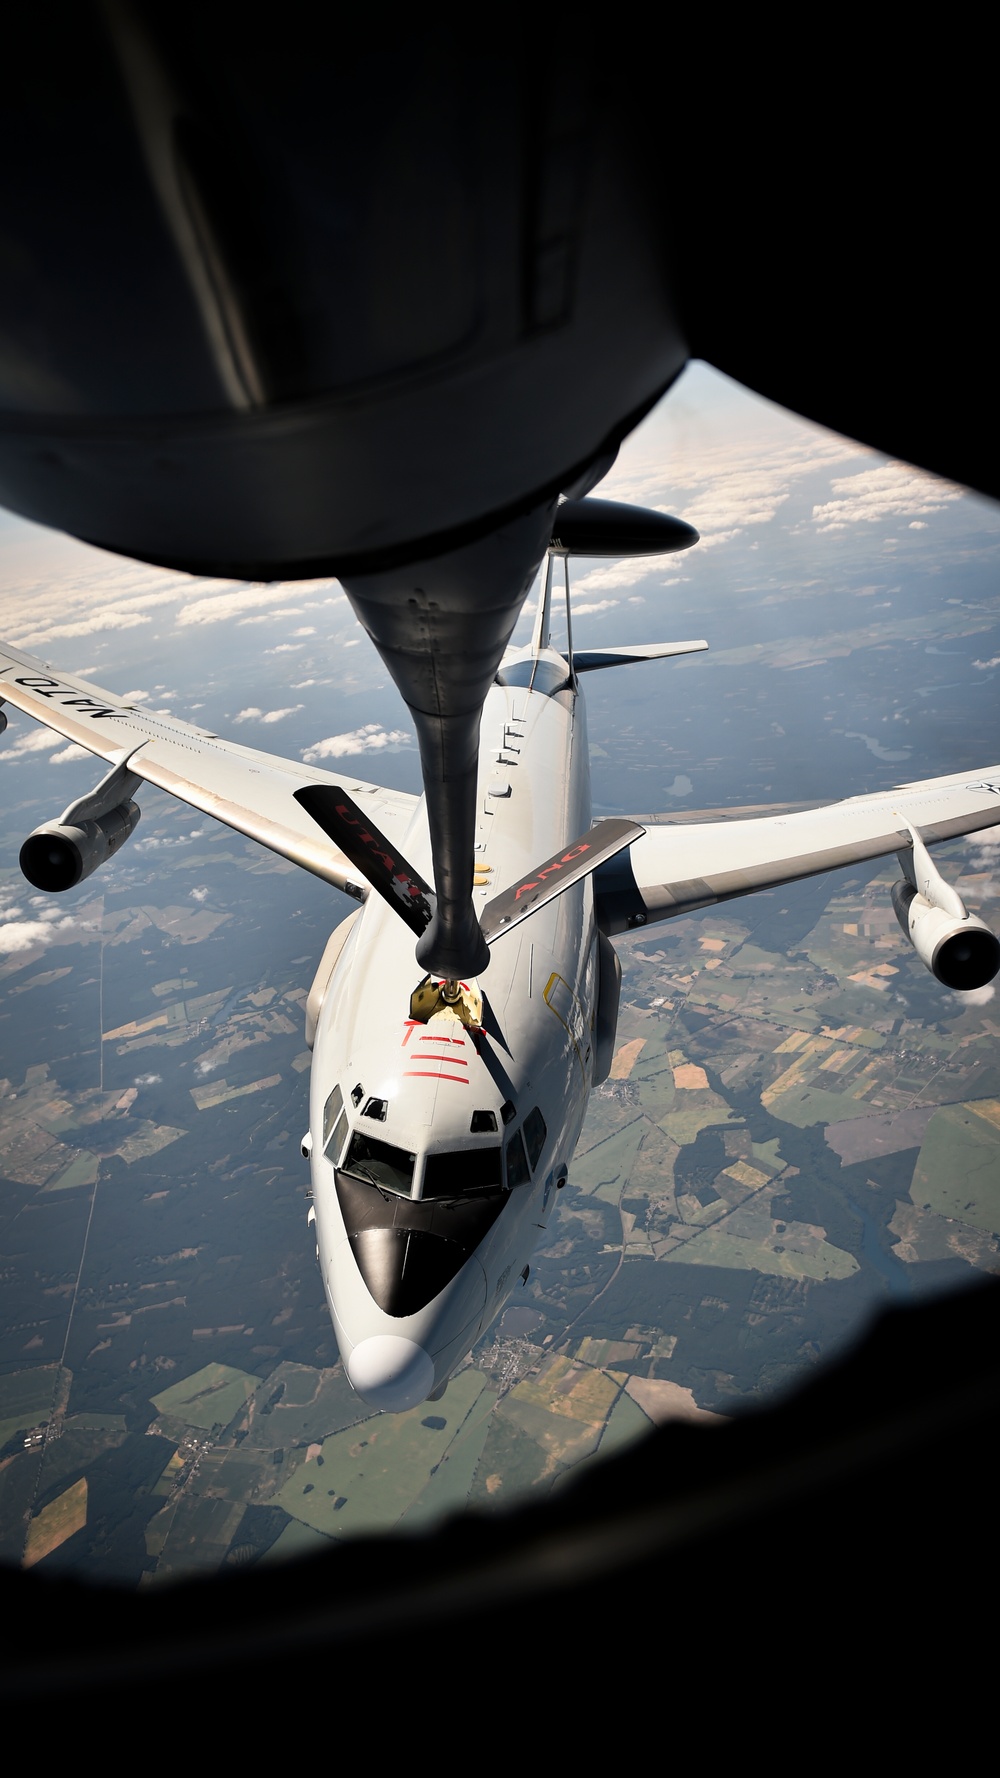 NATO AWACS performs air-to-air refueling